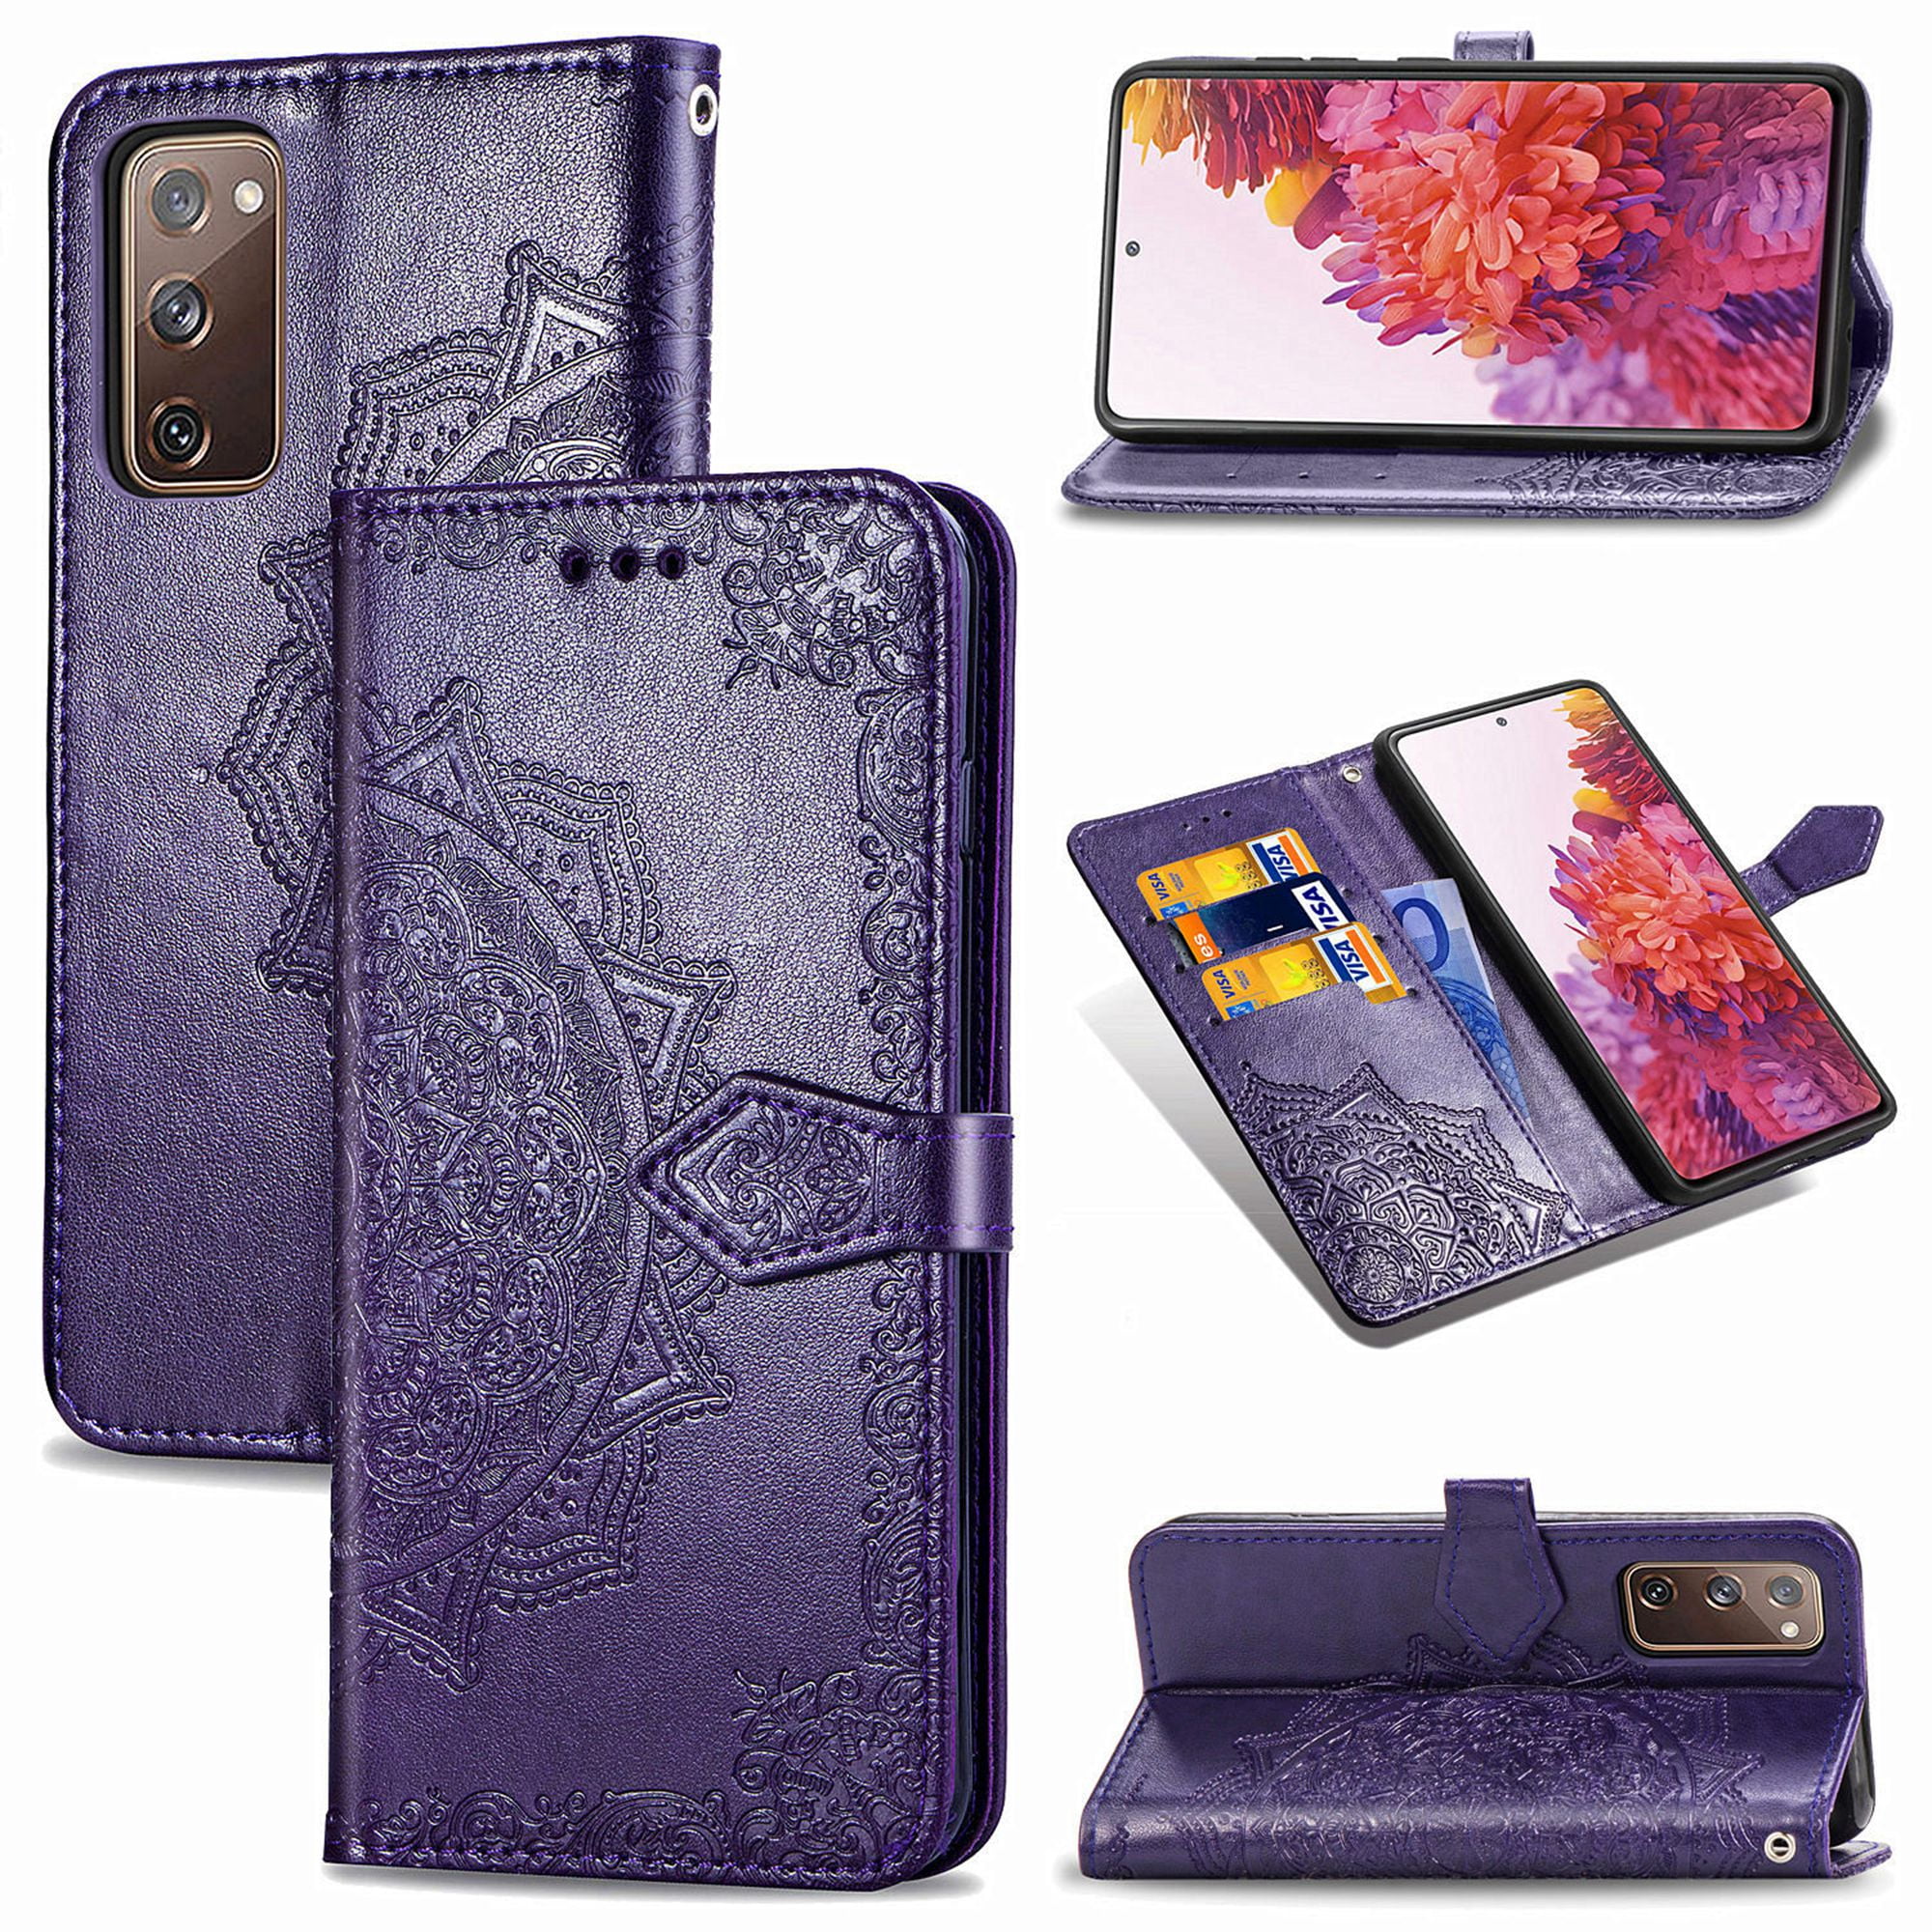 Dteck Case for Samsung Galaxy S20 FE(6.5 inches),Flower Patterned